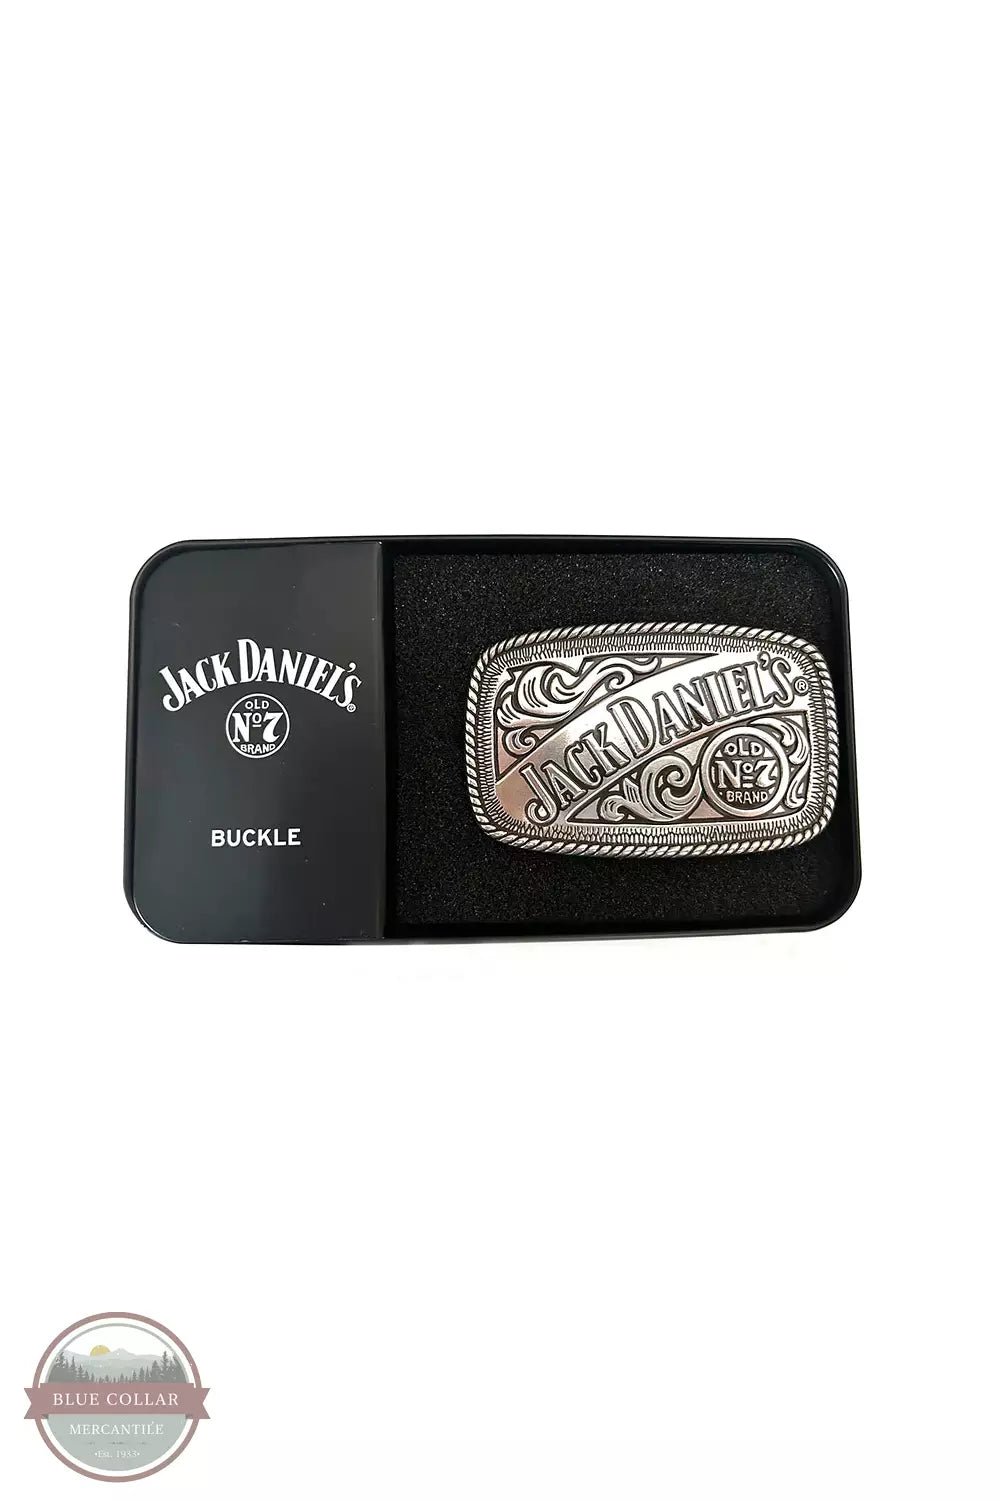 Western Express G-5007 Jack Daniels Old No 7 Buckle Package View